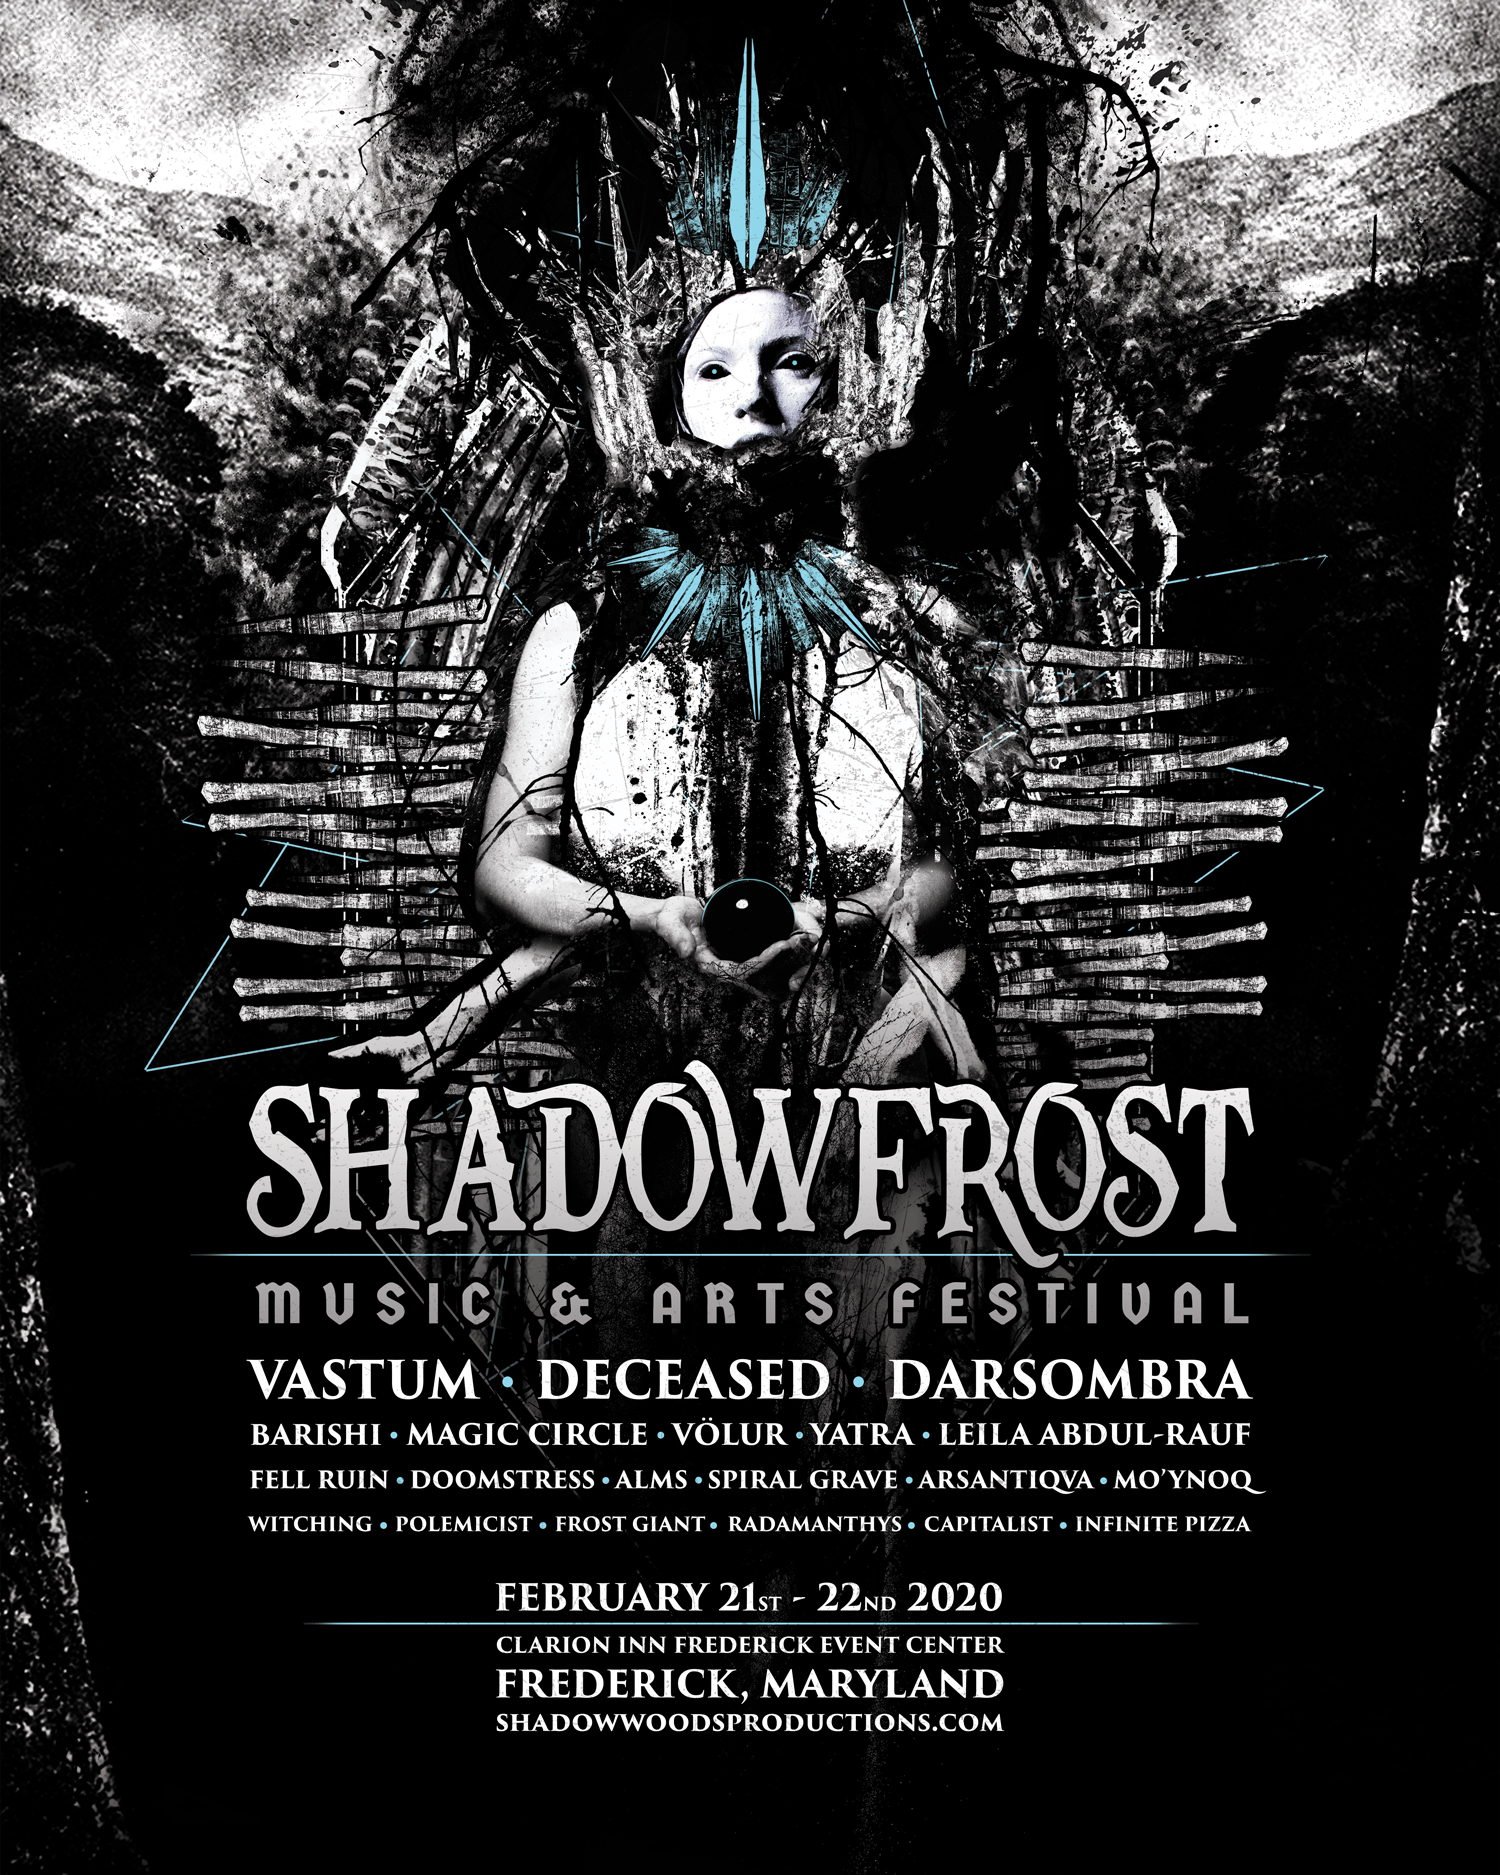 SHADOW FROST MUSIC & ARTS FESTIVAL Frederick, Maryland’s Exclusive